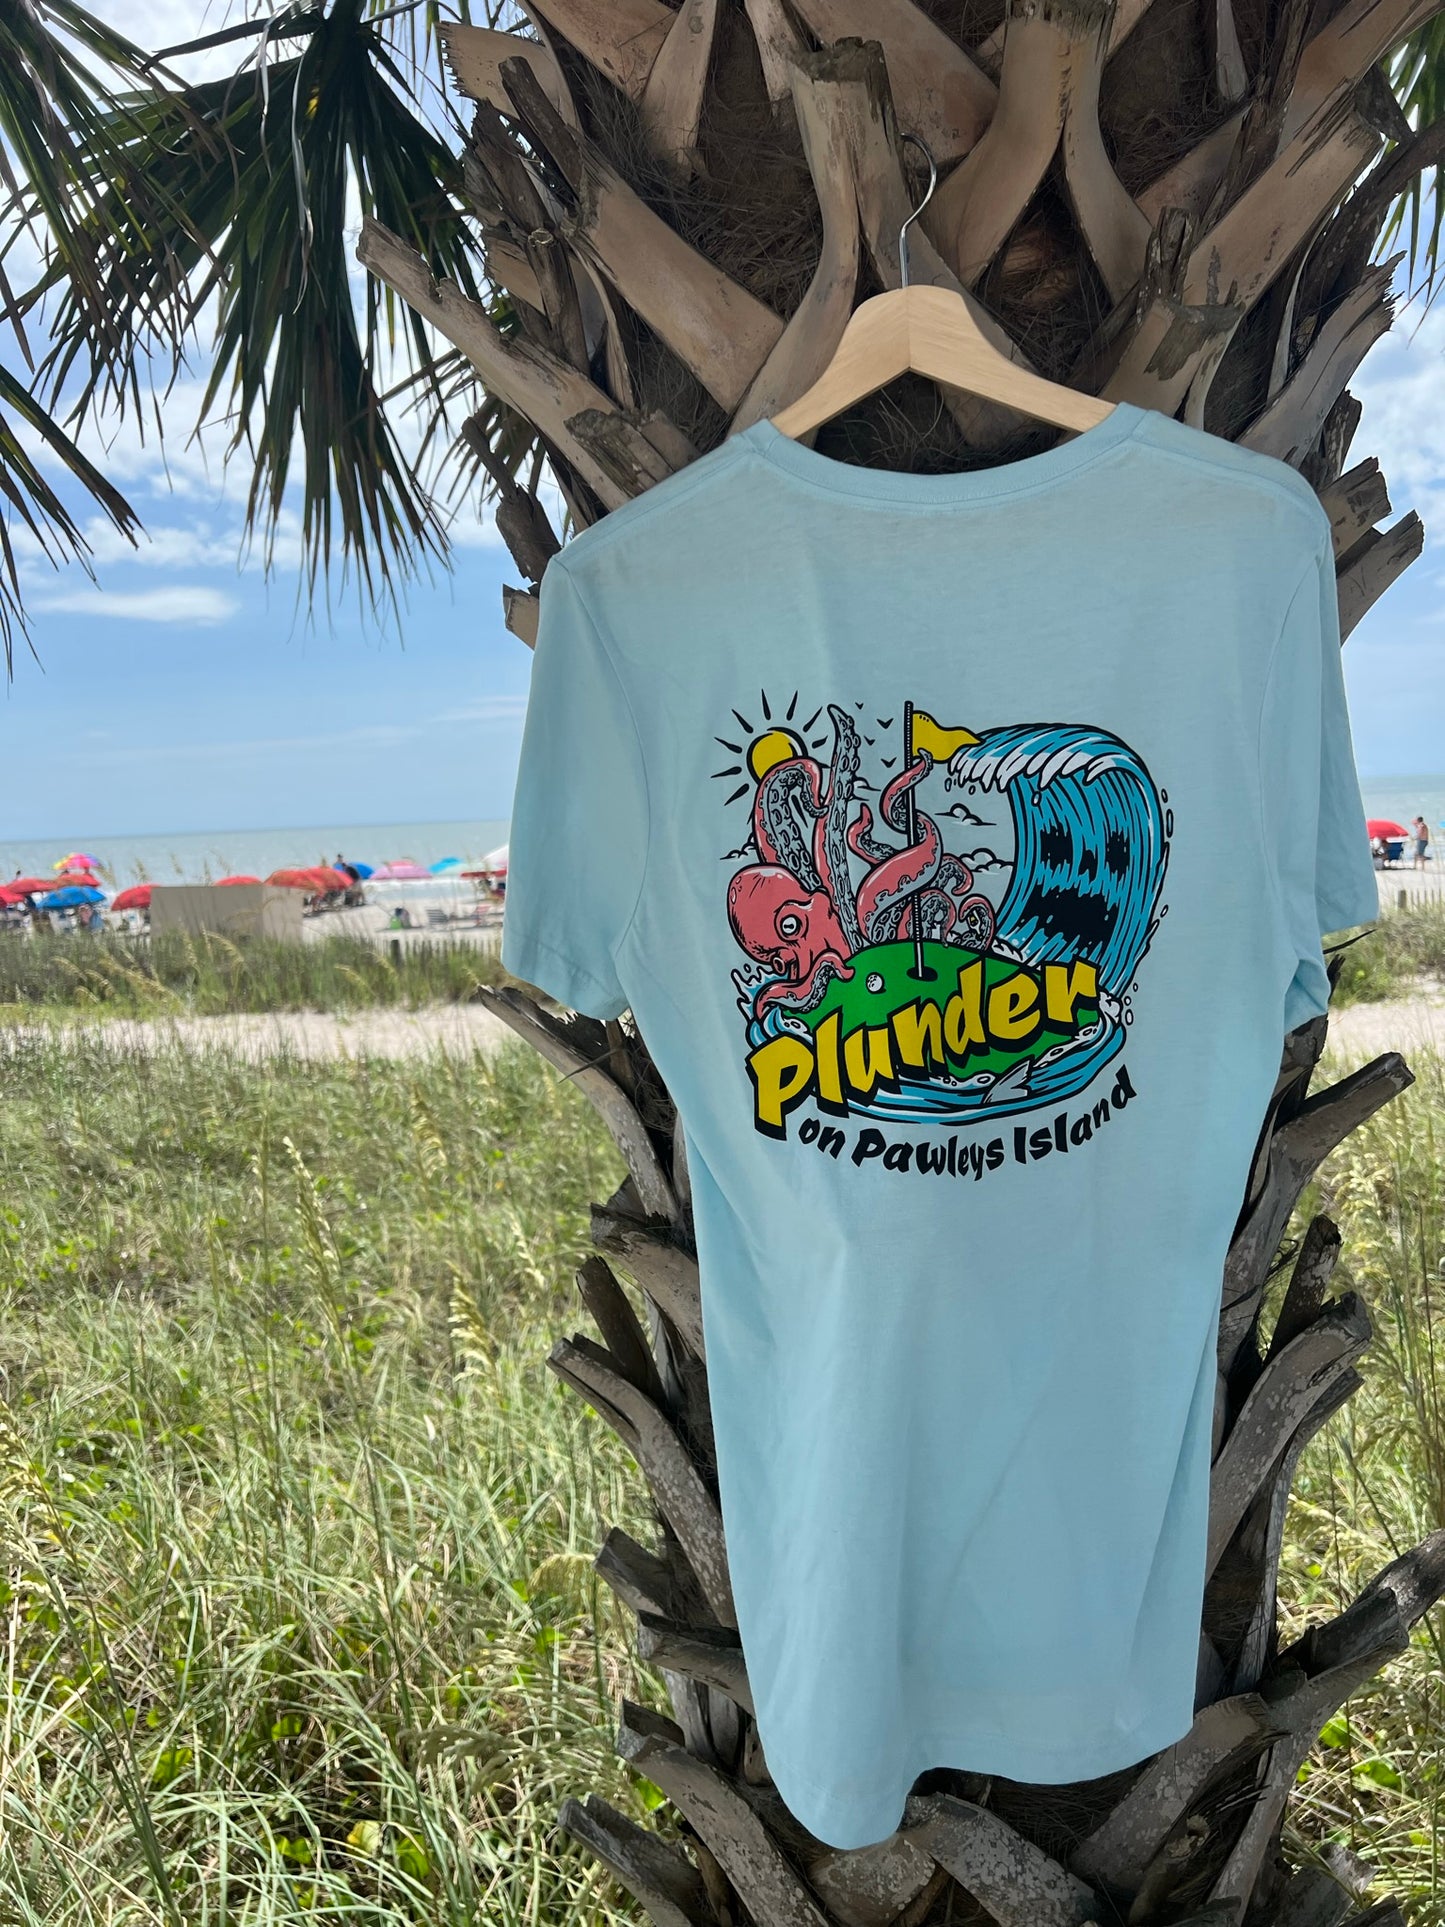 The Plunder on Pawleys Island official tshirt